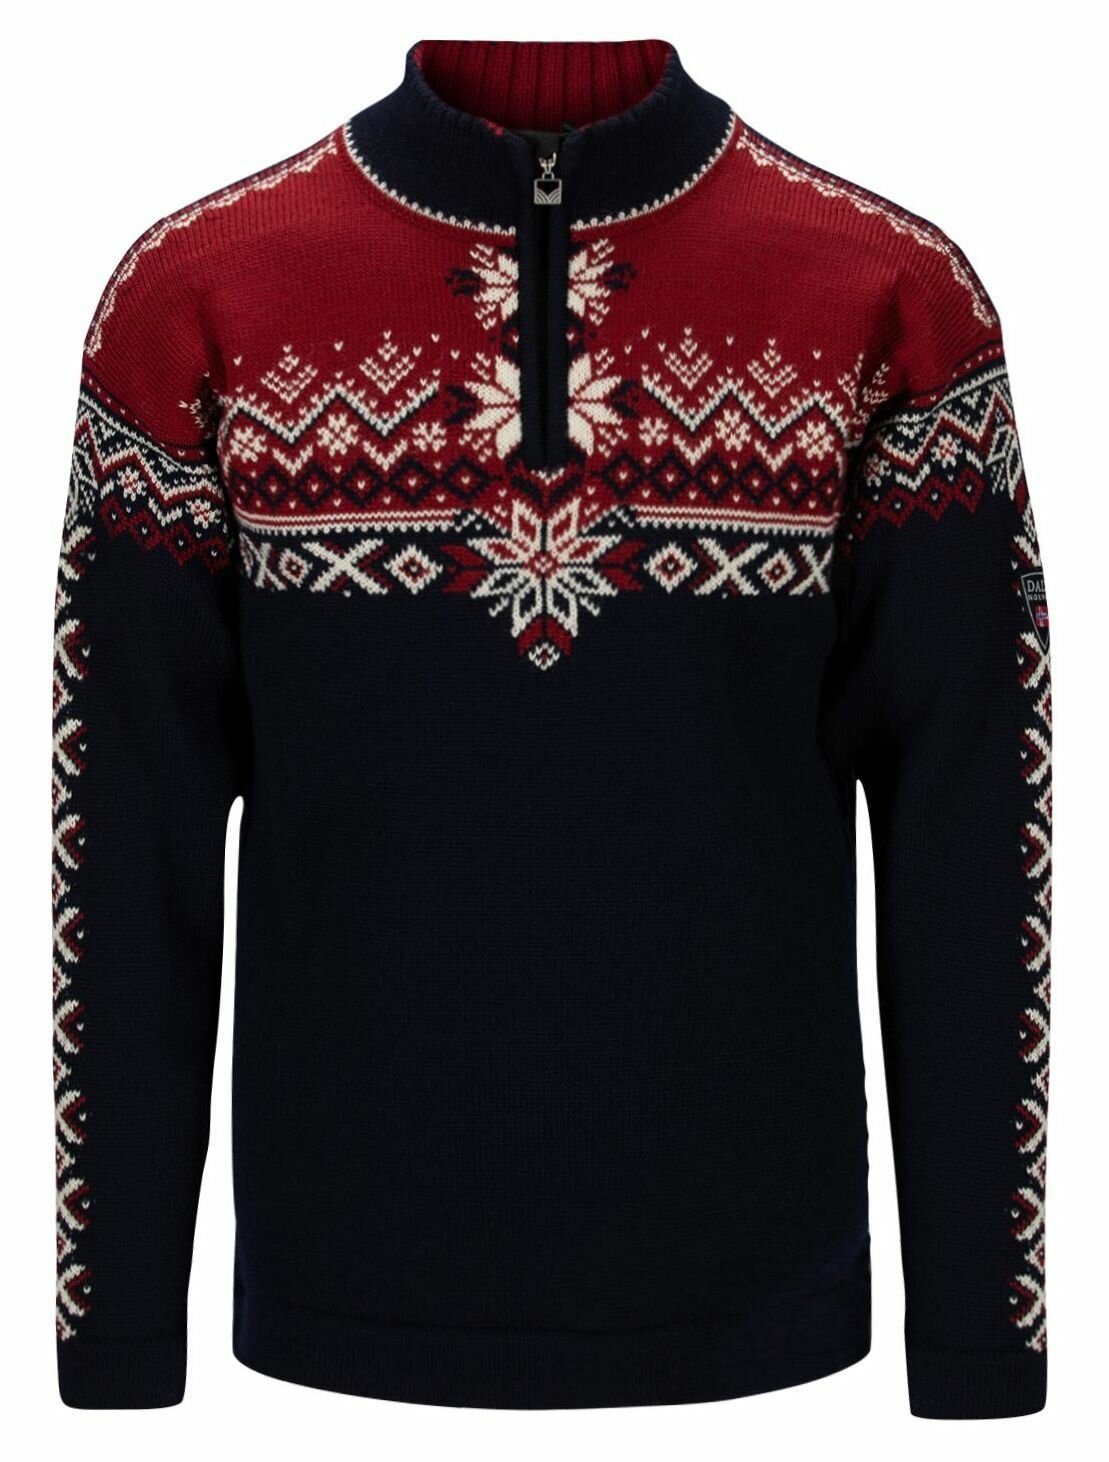 Anniversary 140 Mens Sweater Red/Navy by Dale of Norway - COLDSEASON.com,  289,90 €